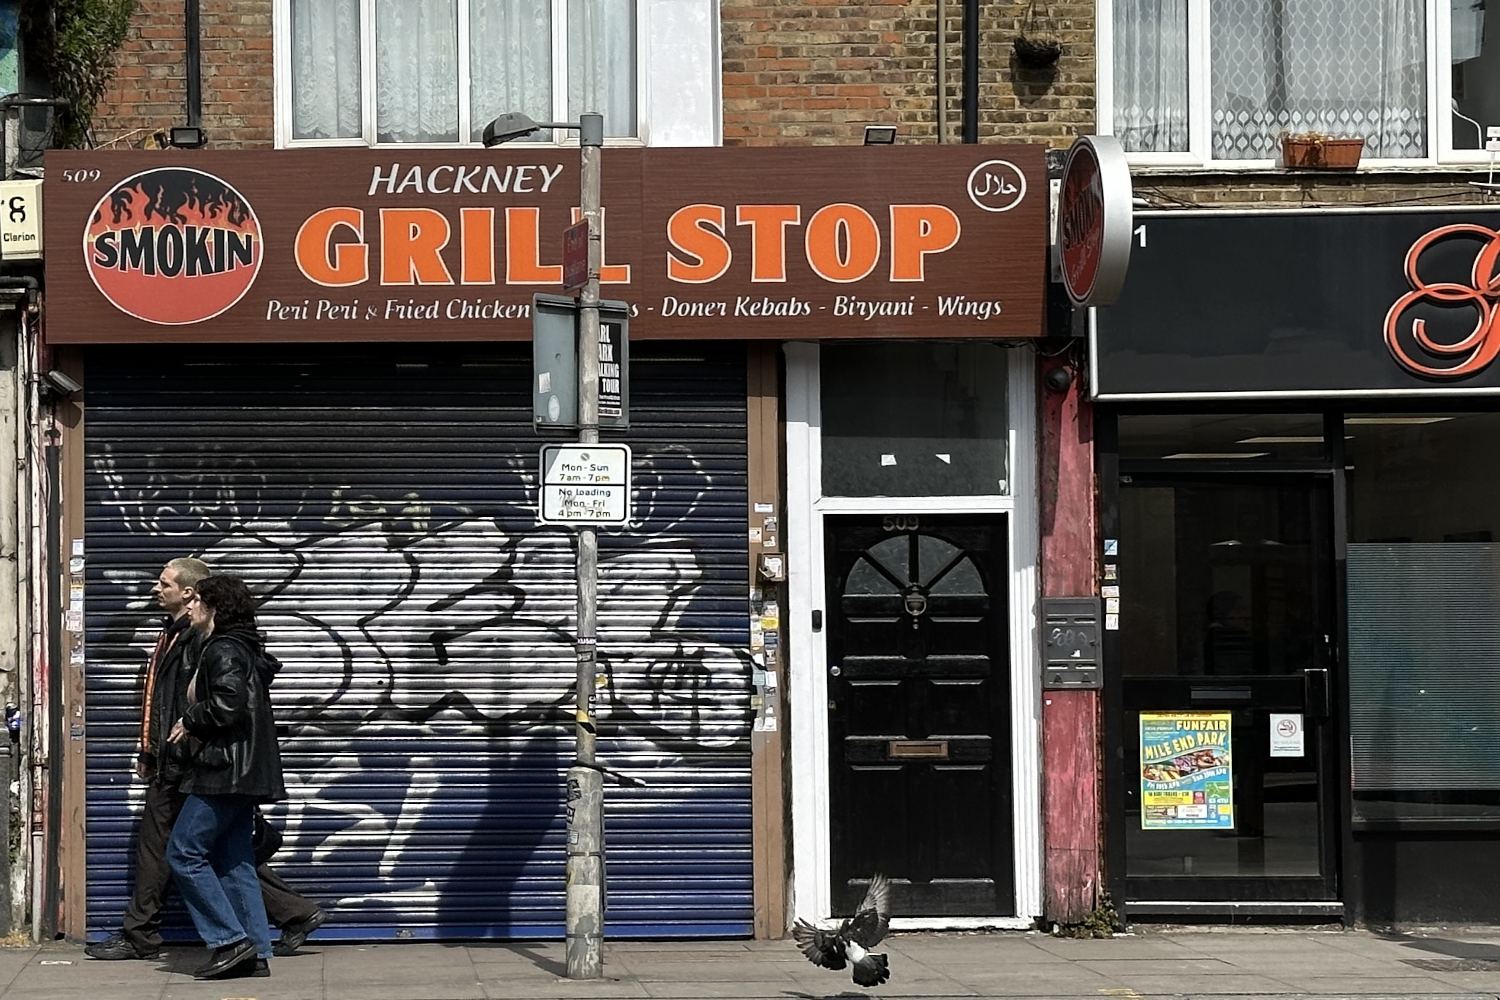 Opposite the bus stop, the Hackney Grill Stop sign shows it serves Fried Chicken and Wings.